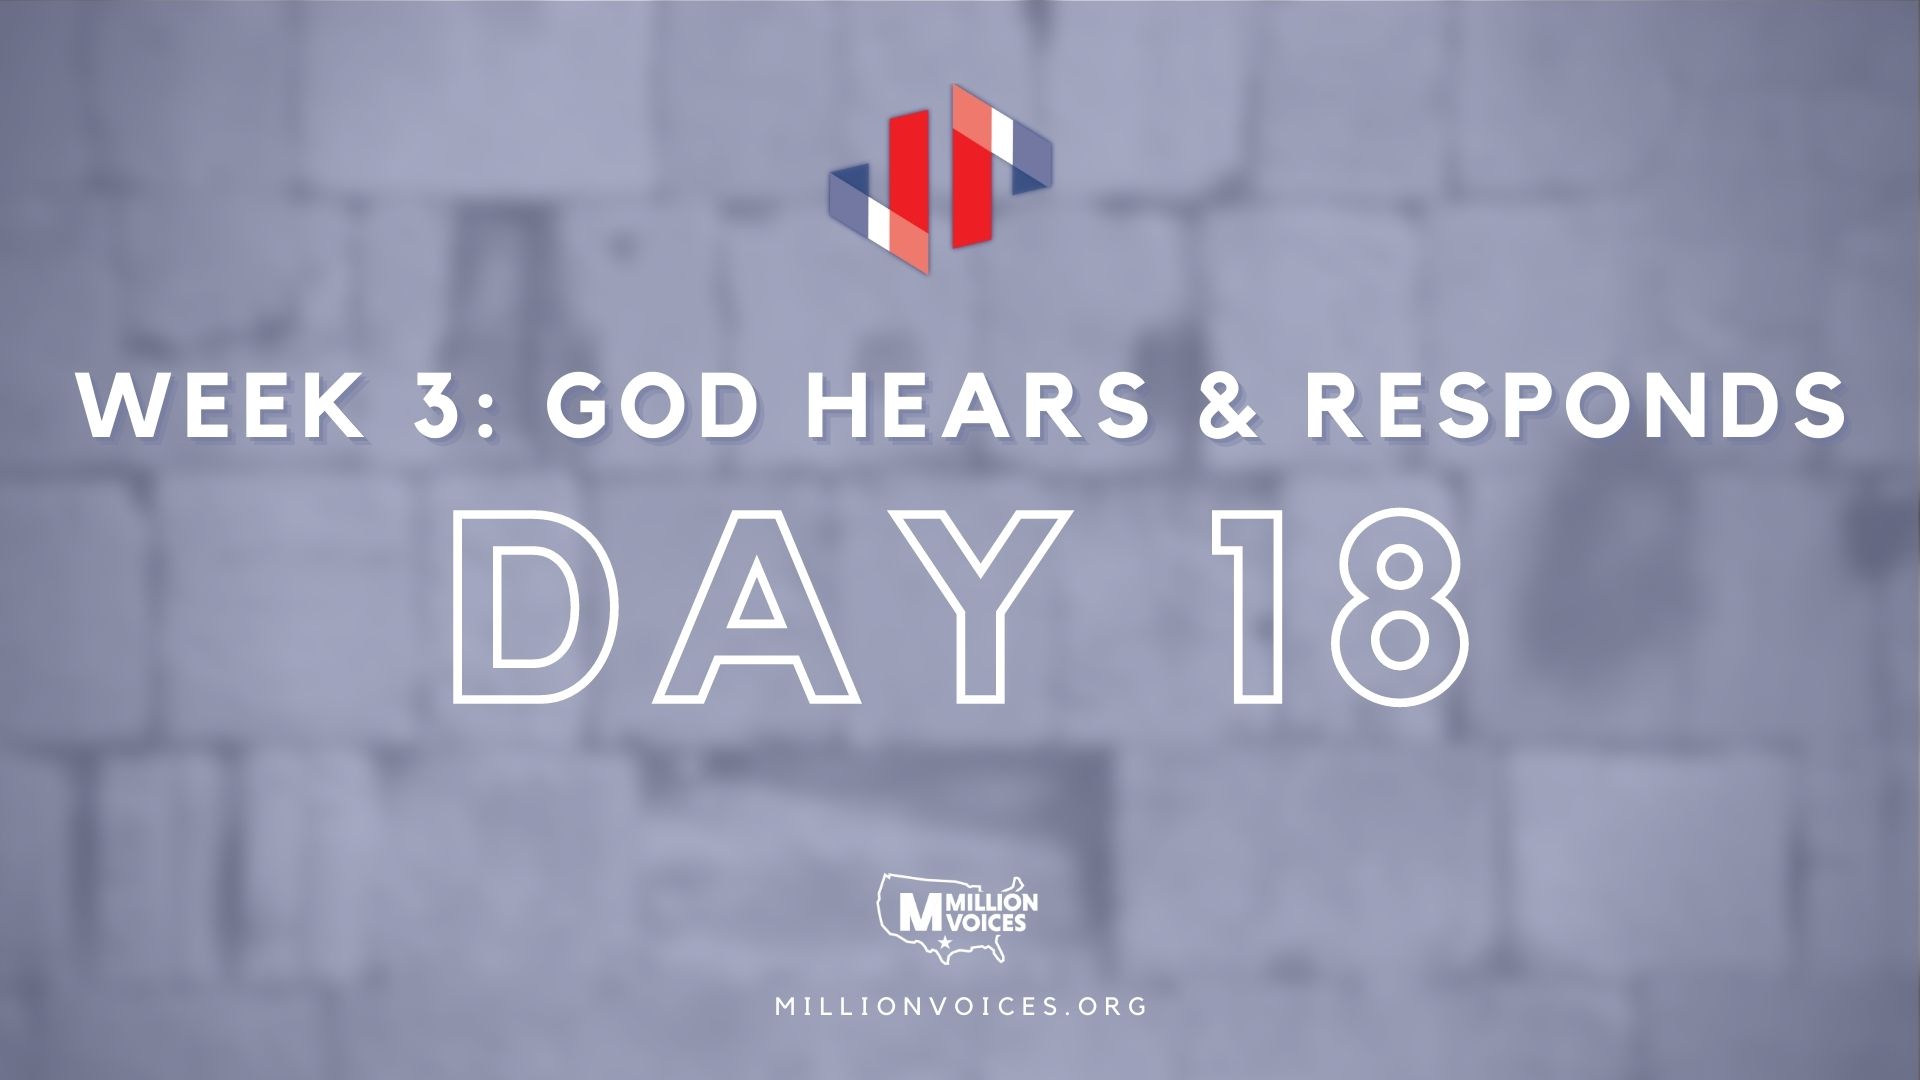 Million Voices - Pause to Pray Images Day 18